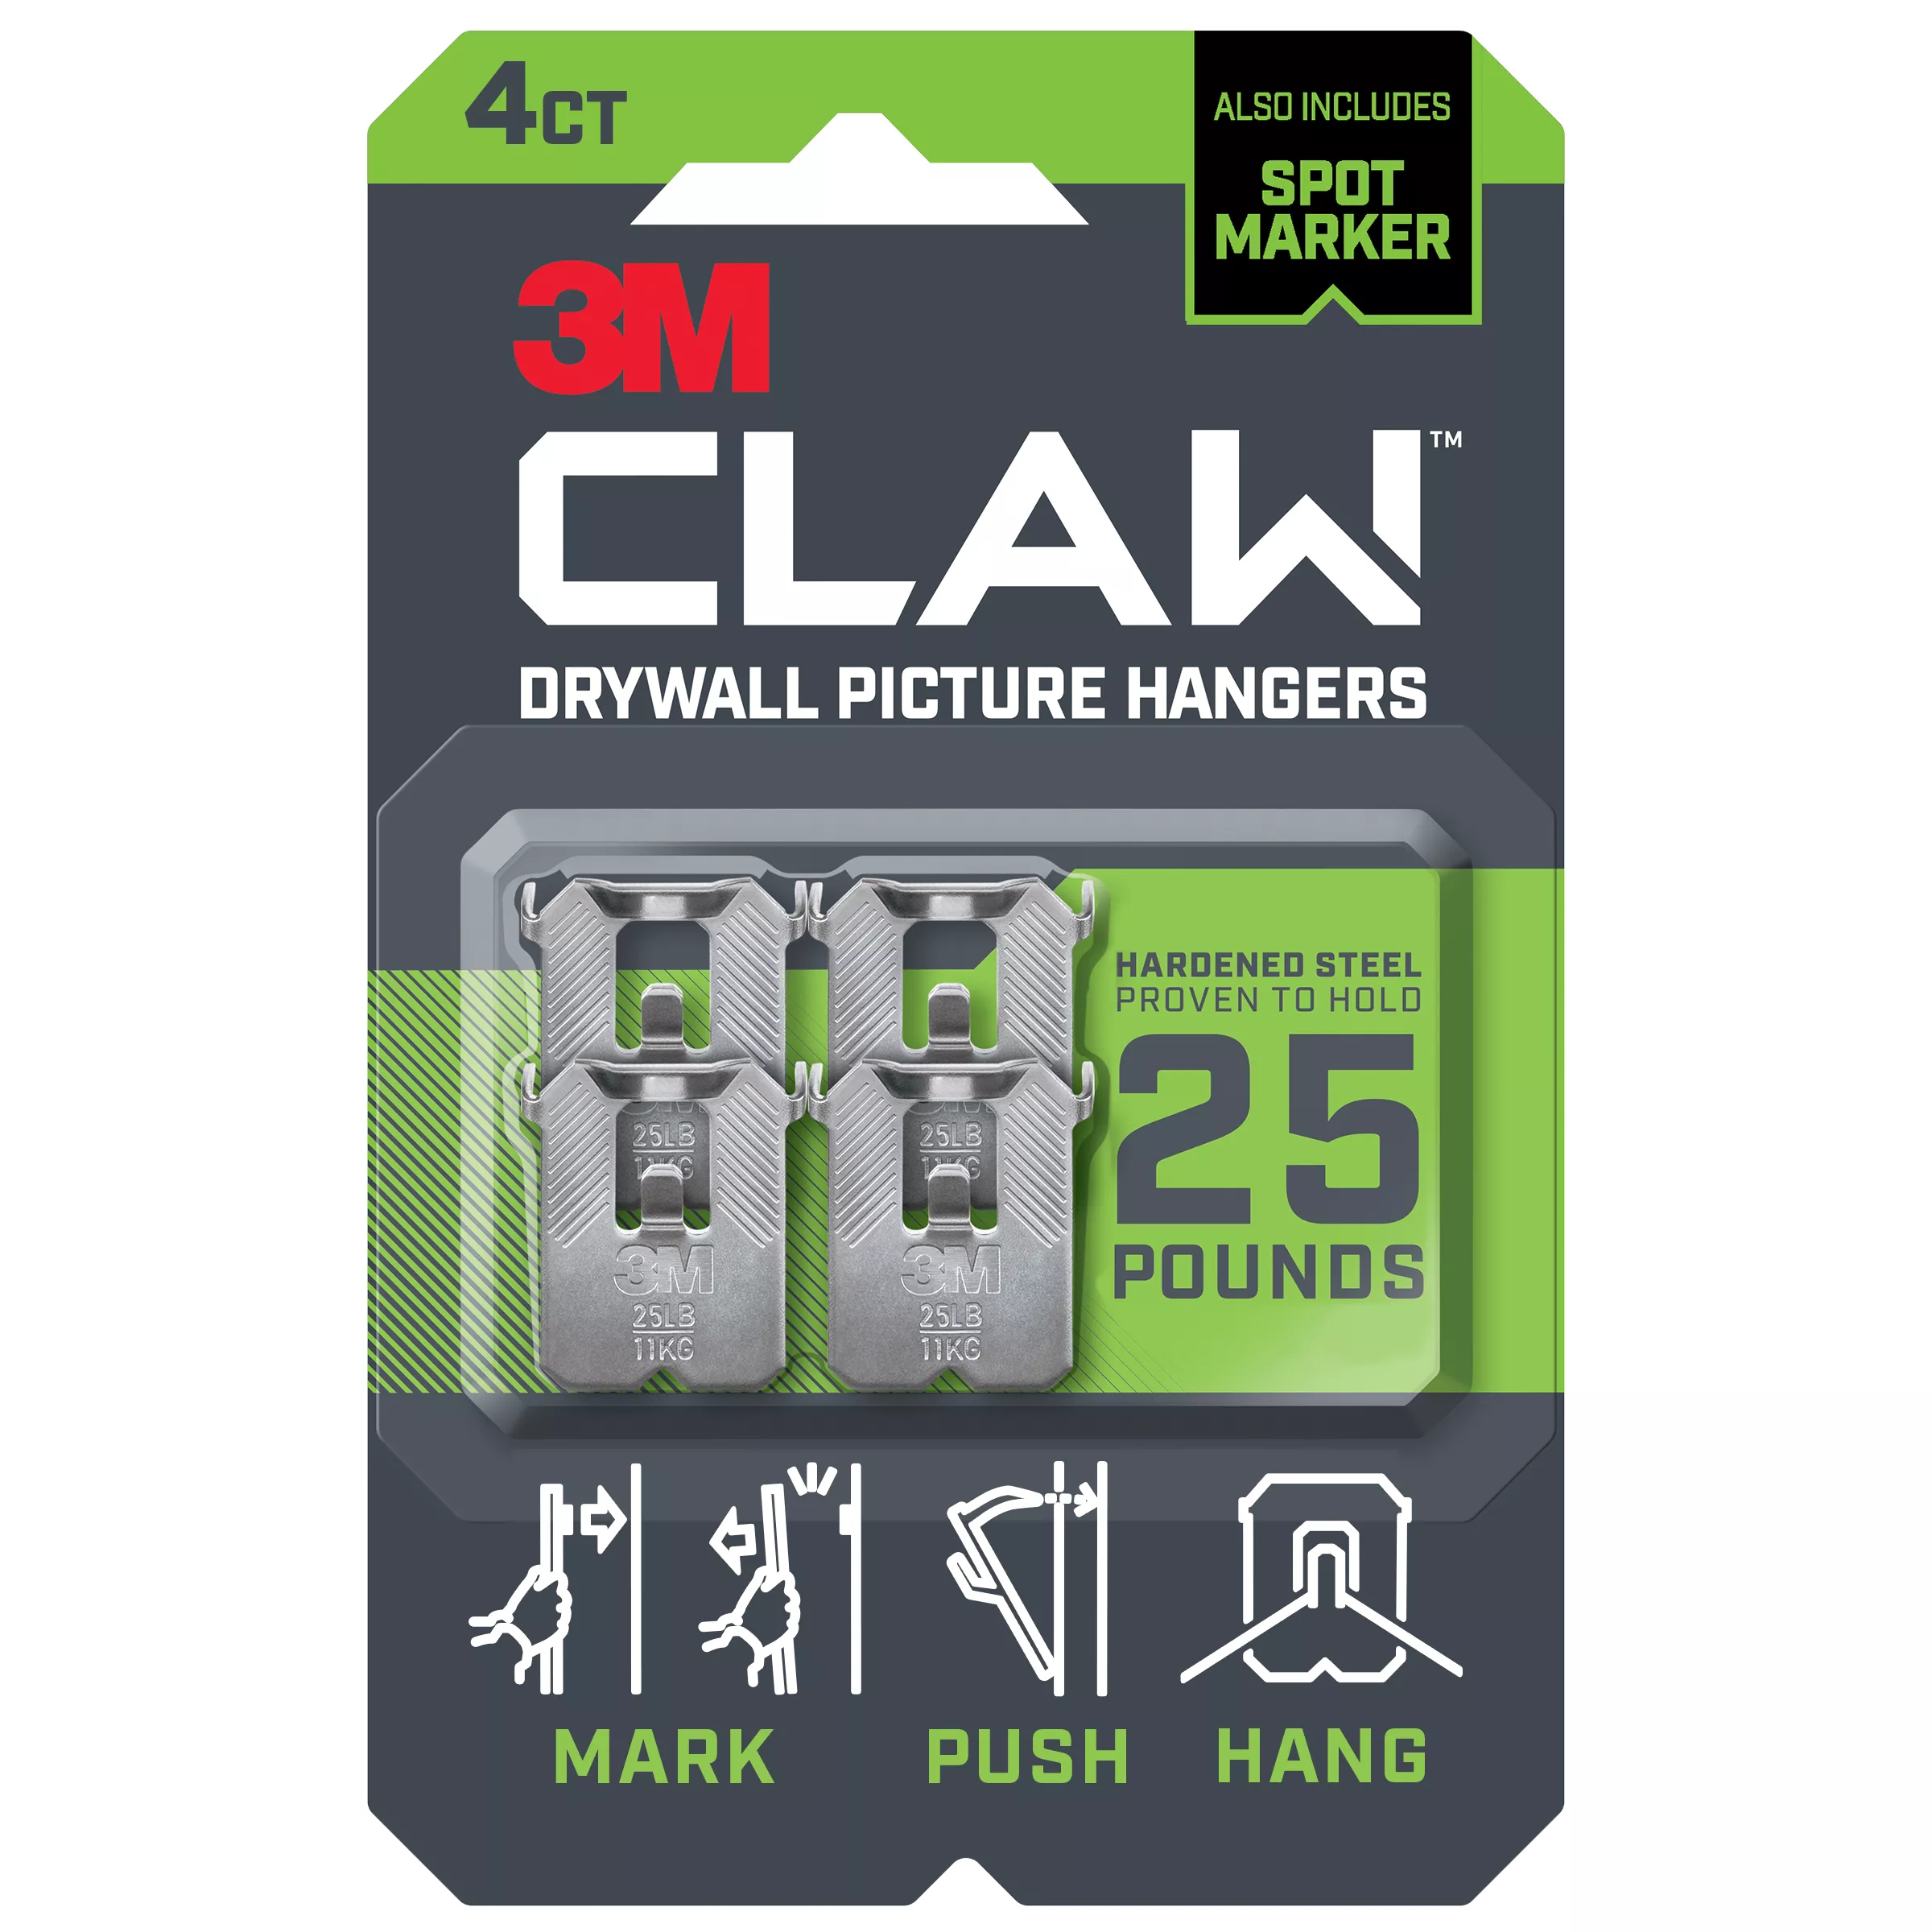 3M CLAW™ Drywall Picture Hanger 25 lb with Temporary Spot Marker 3PH25M-4EF, 4 hangers, 4 markers